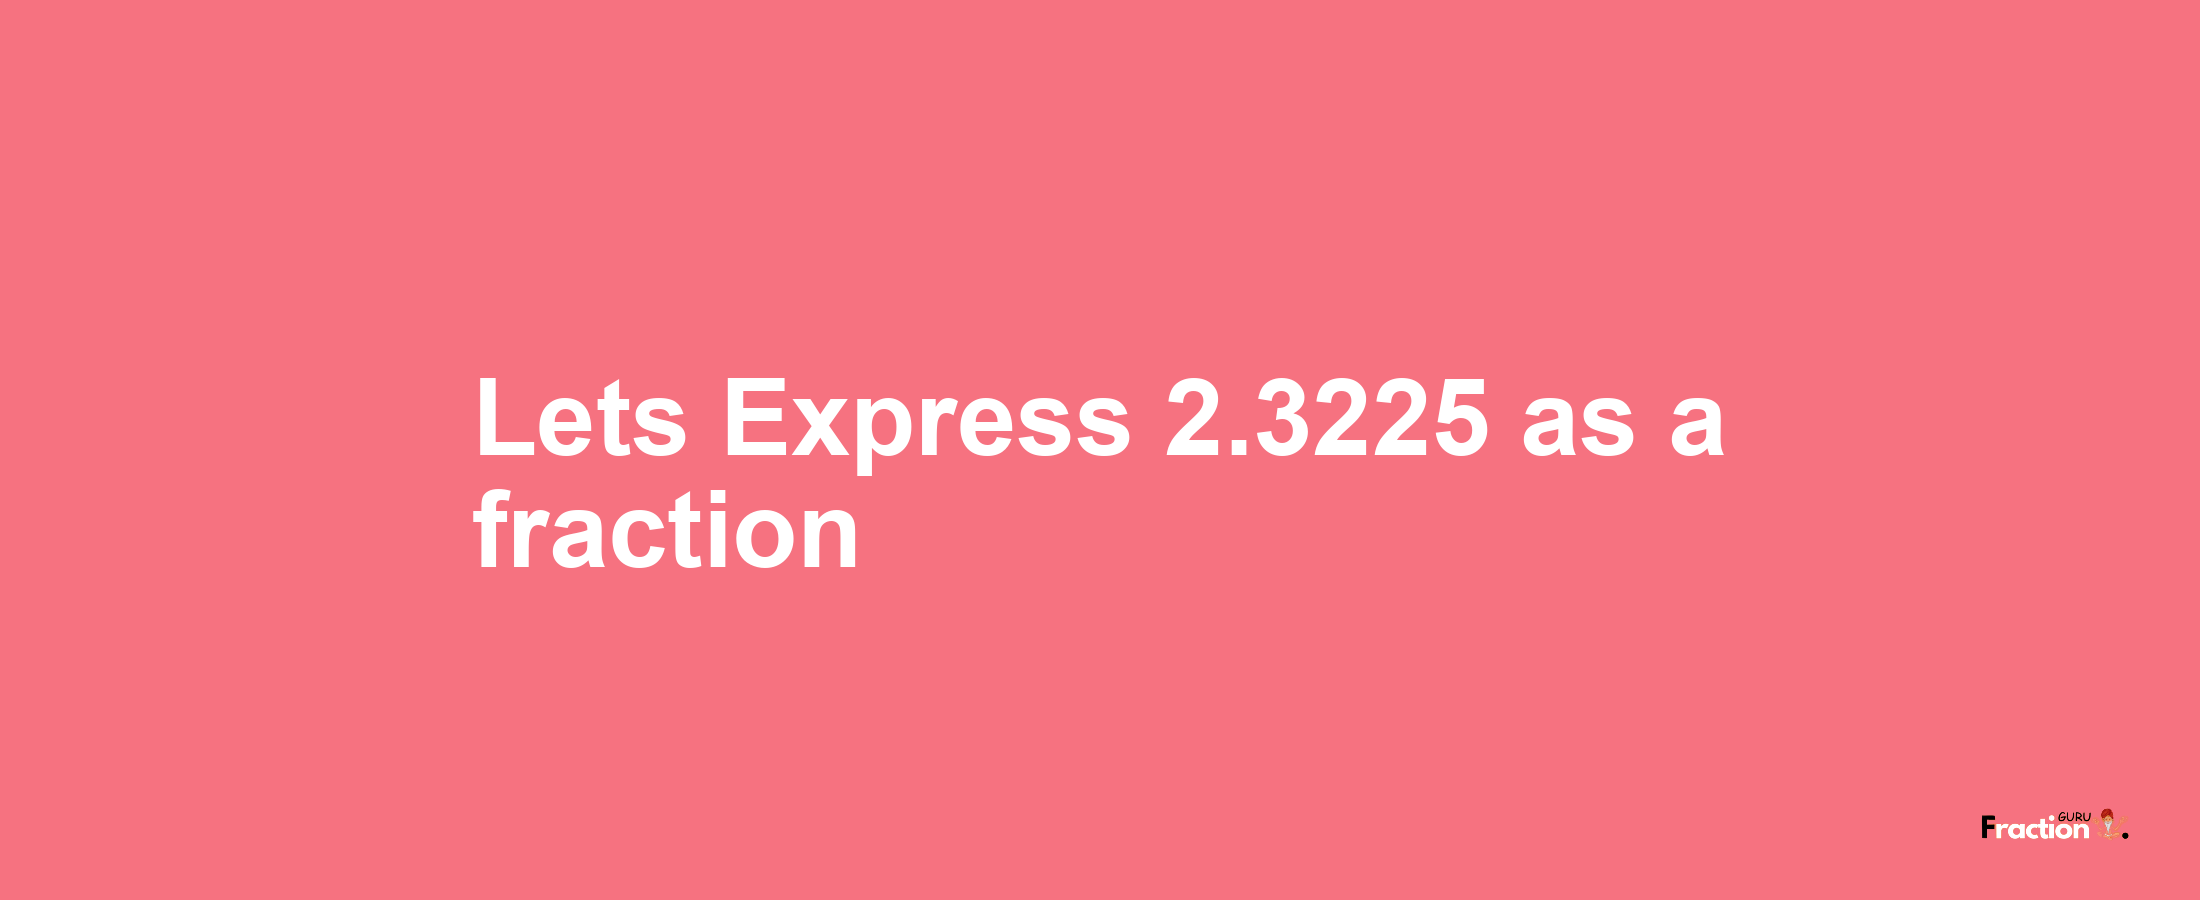 Lets Express 2.3225 as afraction